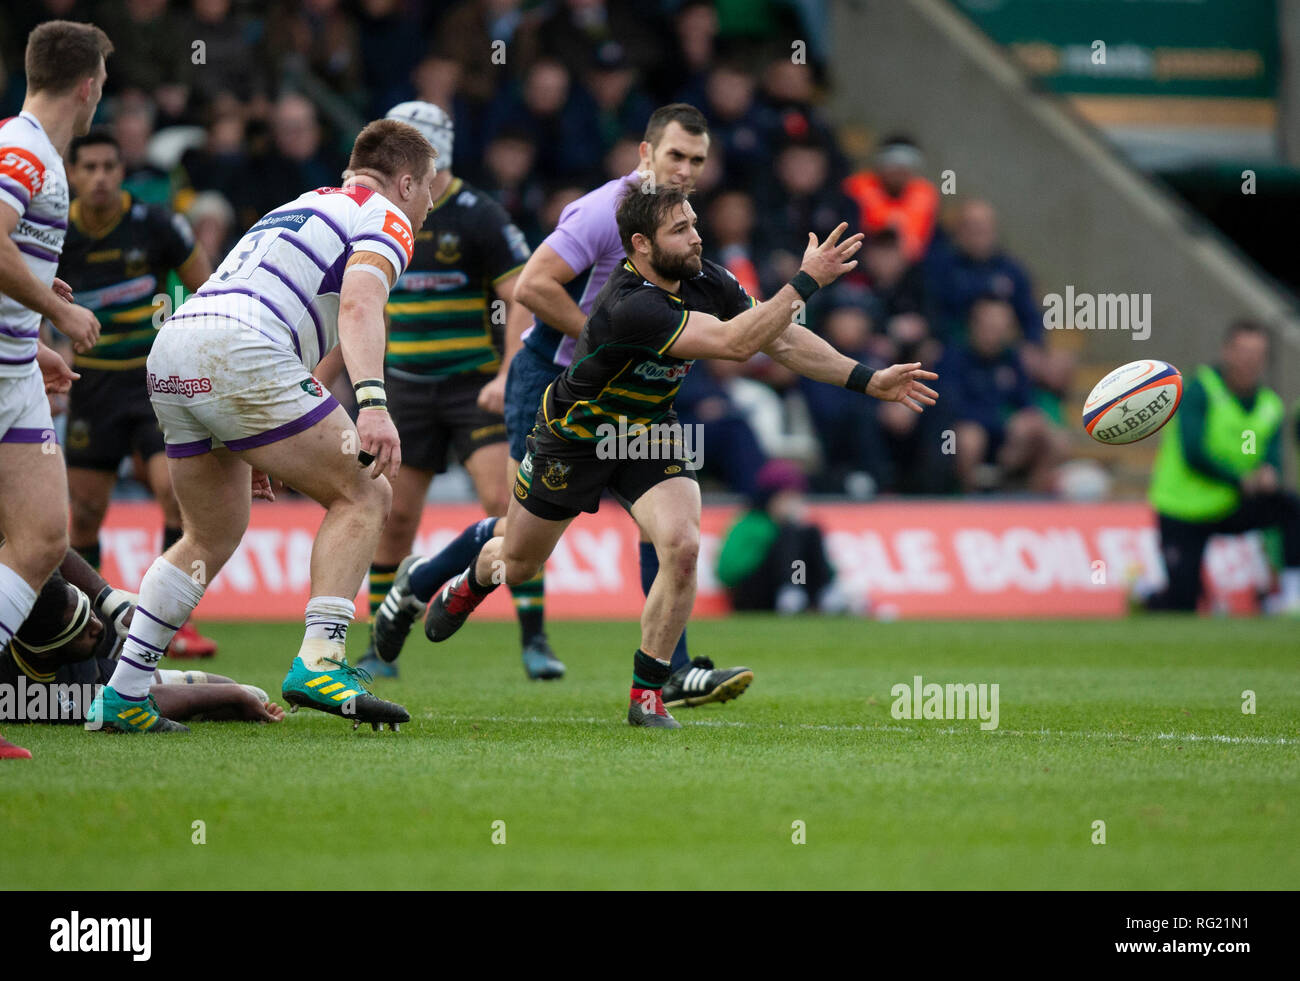 Northampton, UK. 26th January 2019. Cobus Reinach of Northampton Saints passes the ball during the Premiership Rugby Cup match between Northampton Saints and Leicester Tigers. Andrew Taylor/Alamy Live News Stock Photo